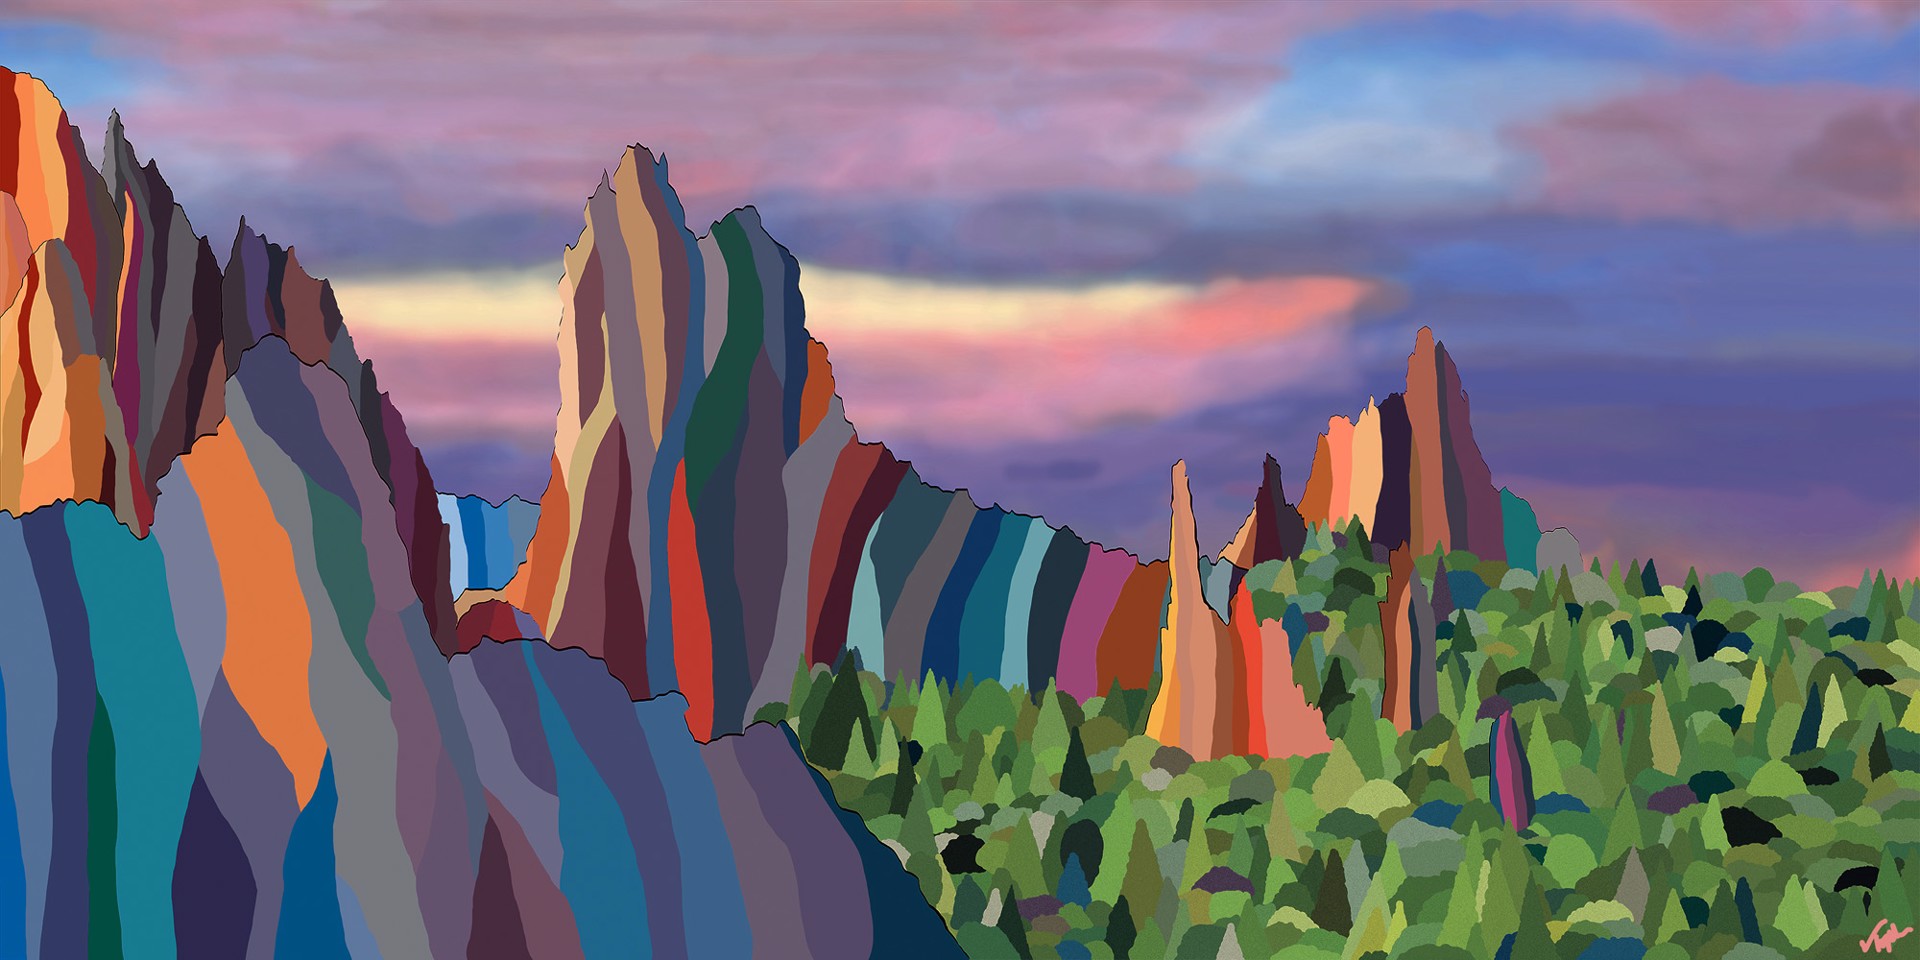 Garden of the Gods by Topher Straus